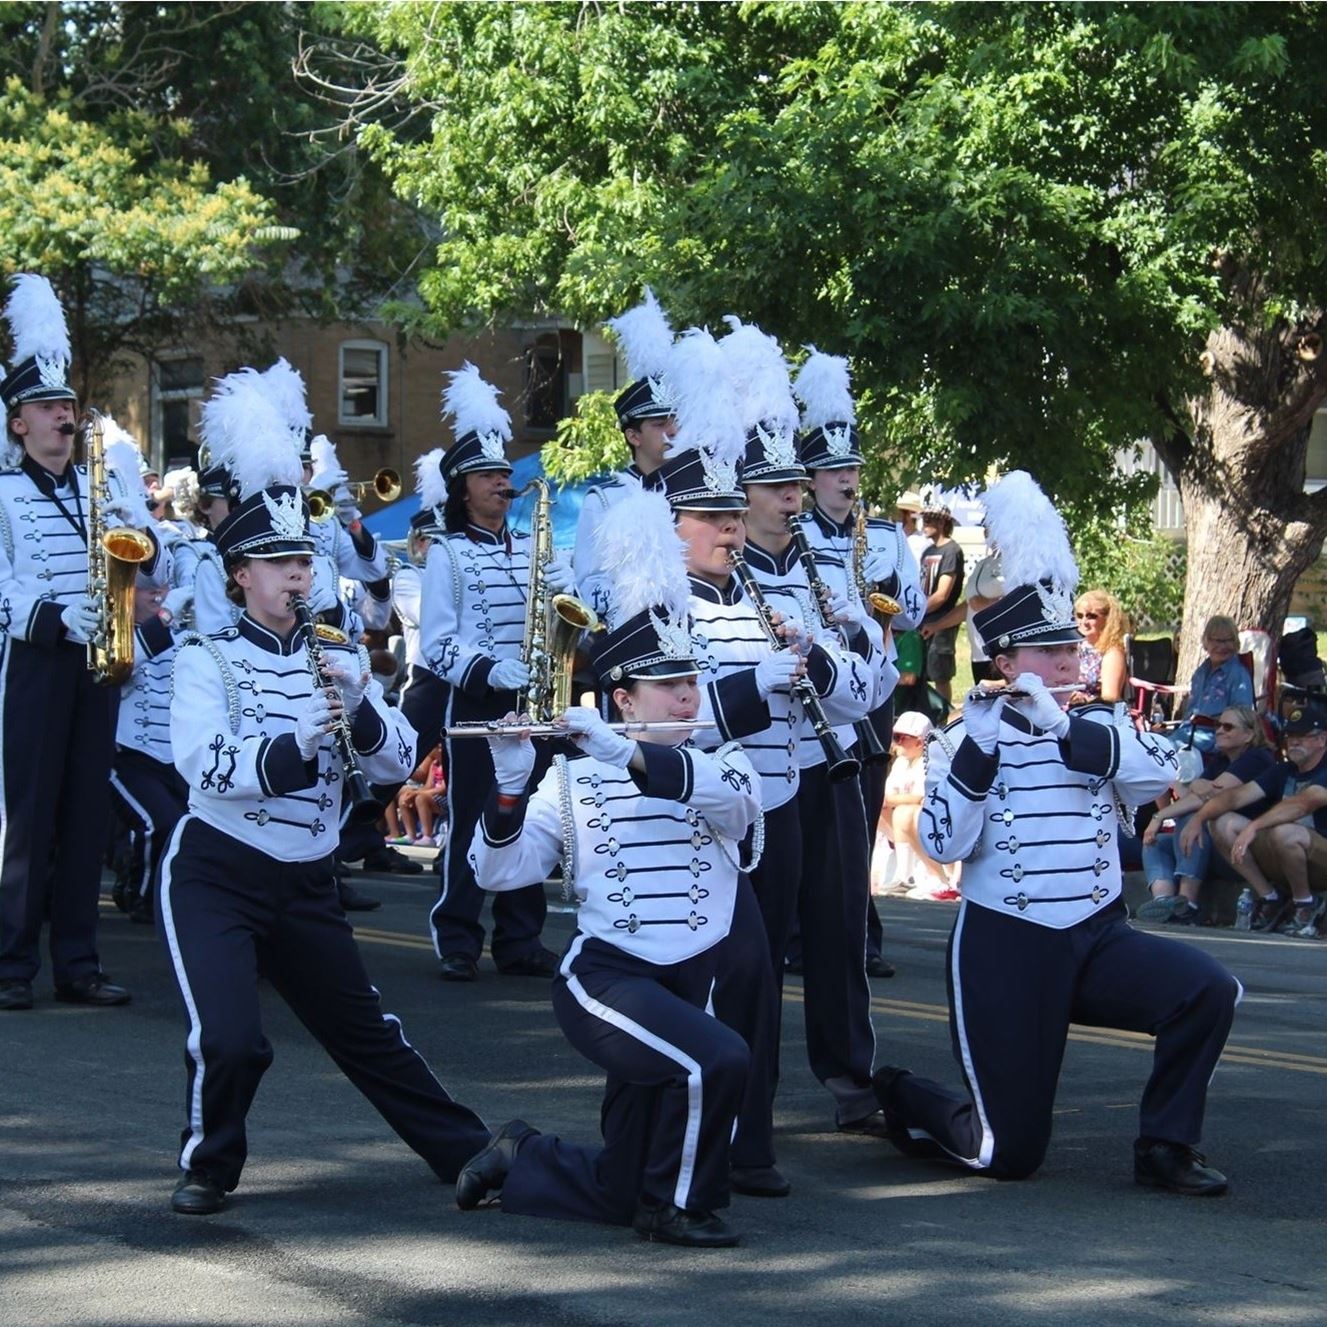 Best Marching Band - Patriots Marching Band